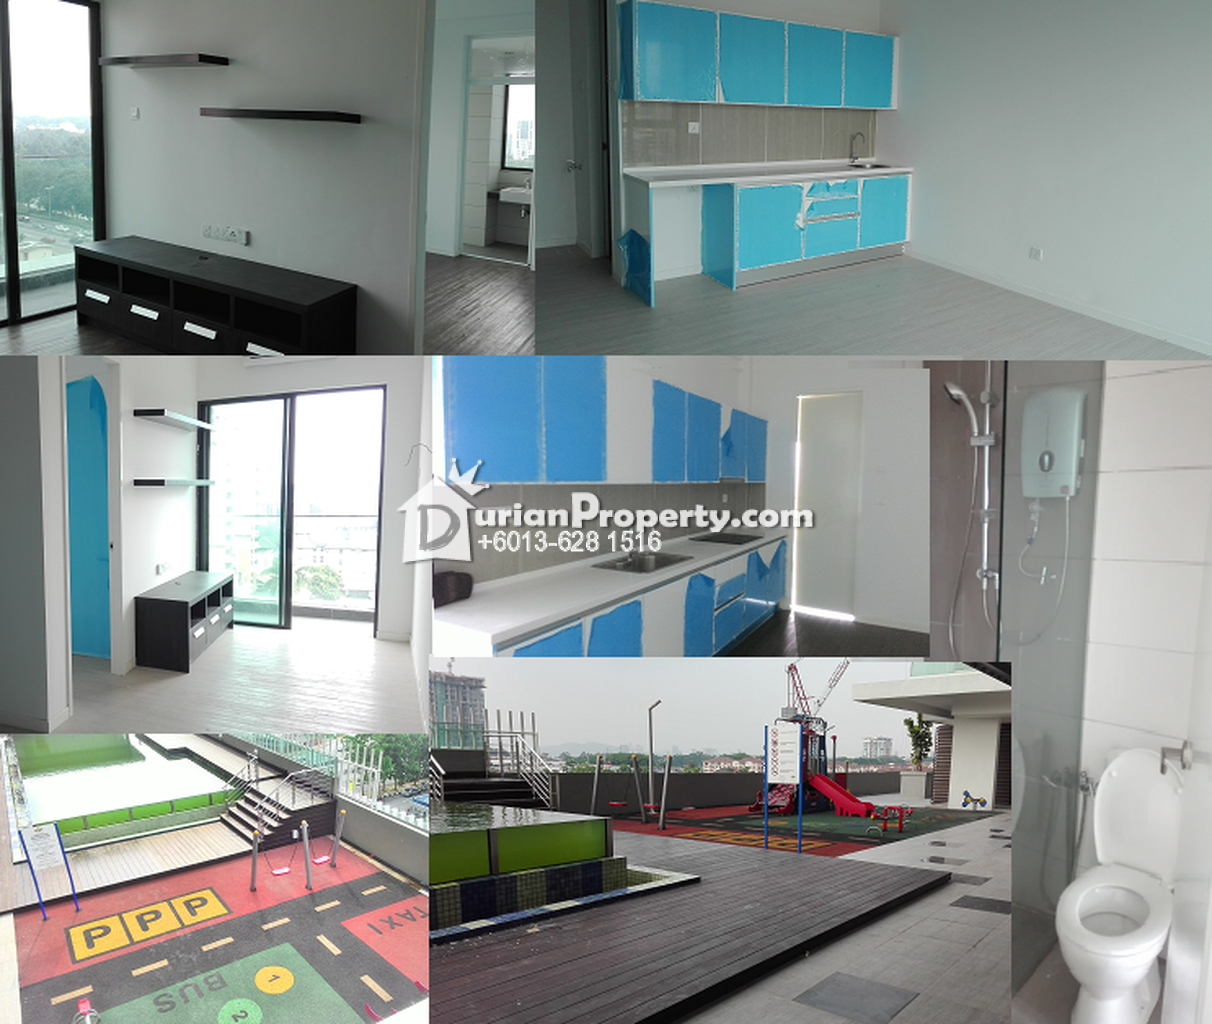 Soho For Rent At The Grand Petaling Jaya For Rm 950 By Qhameil Durianproperty